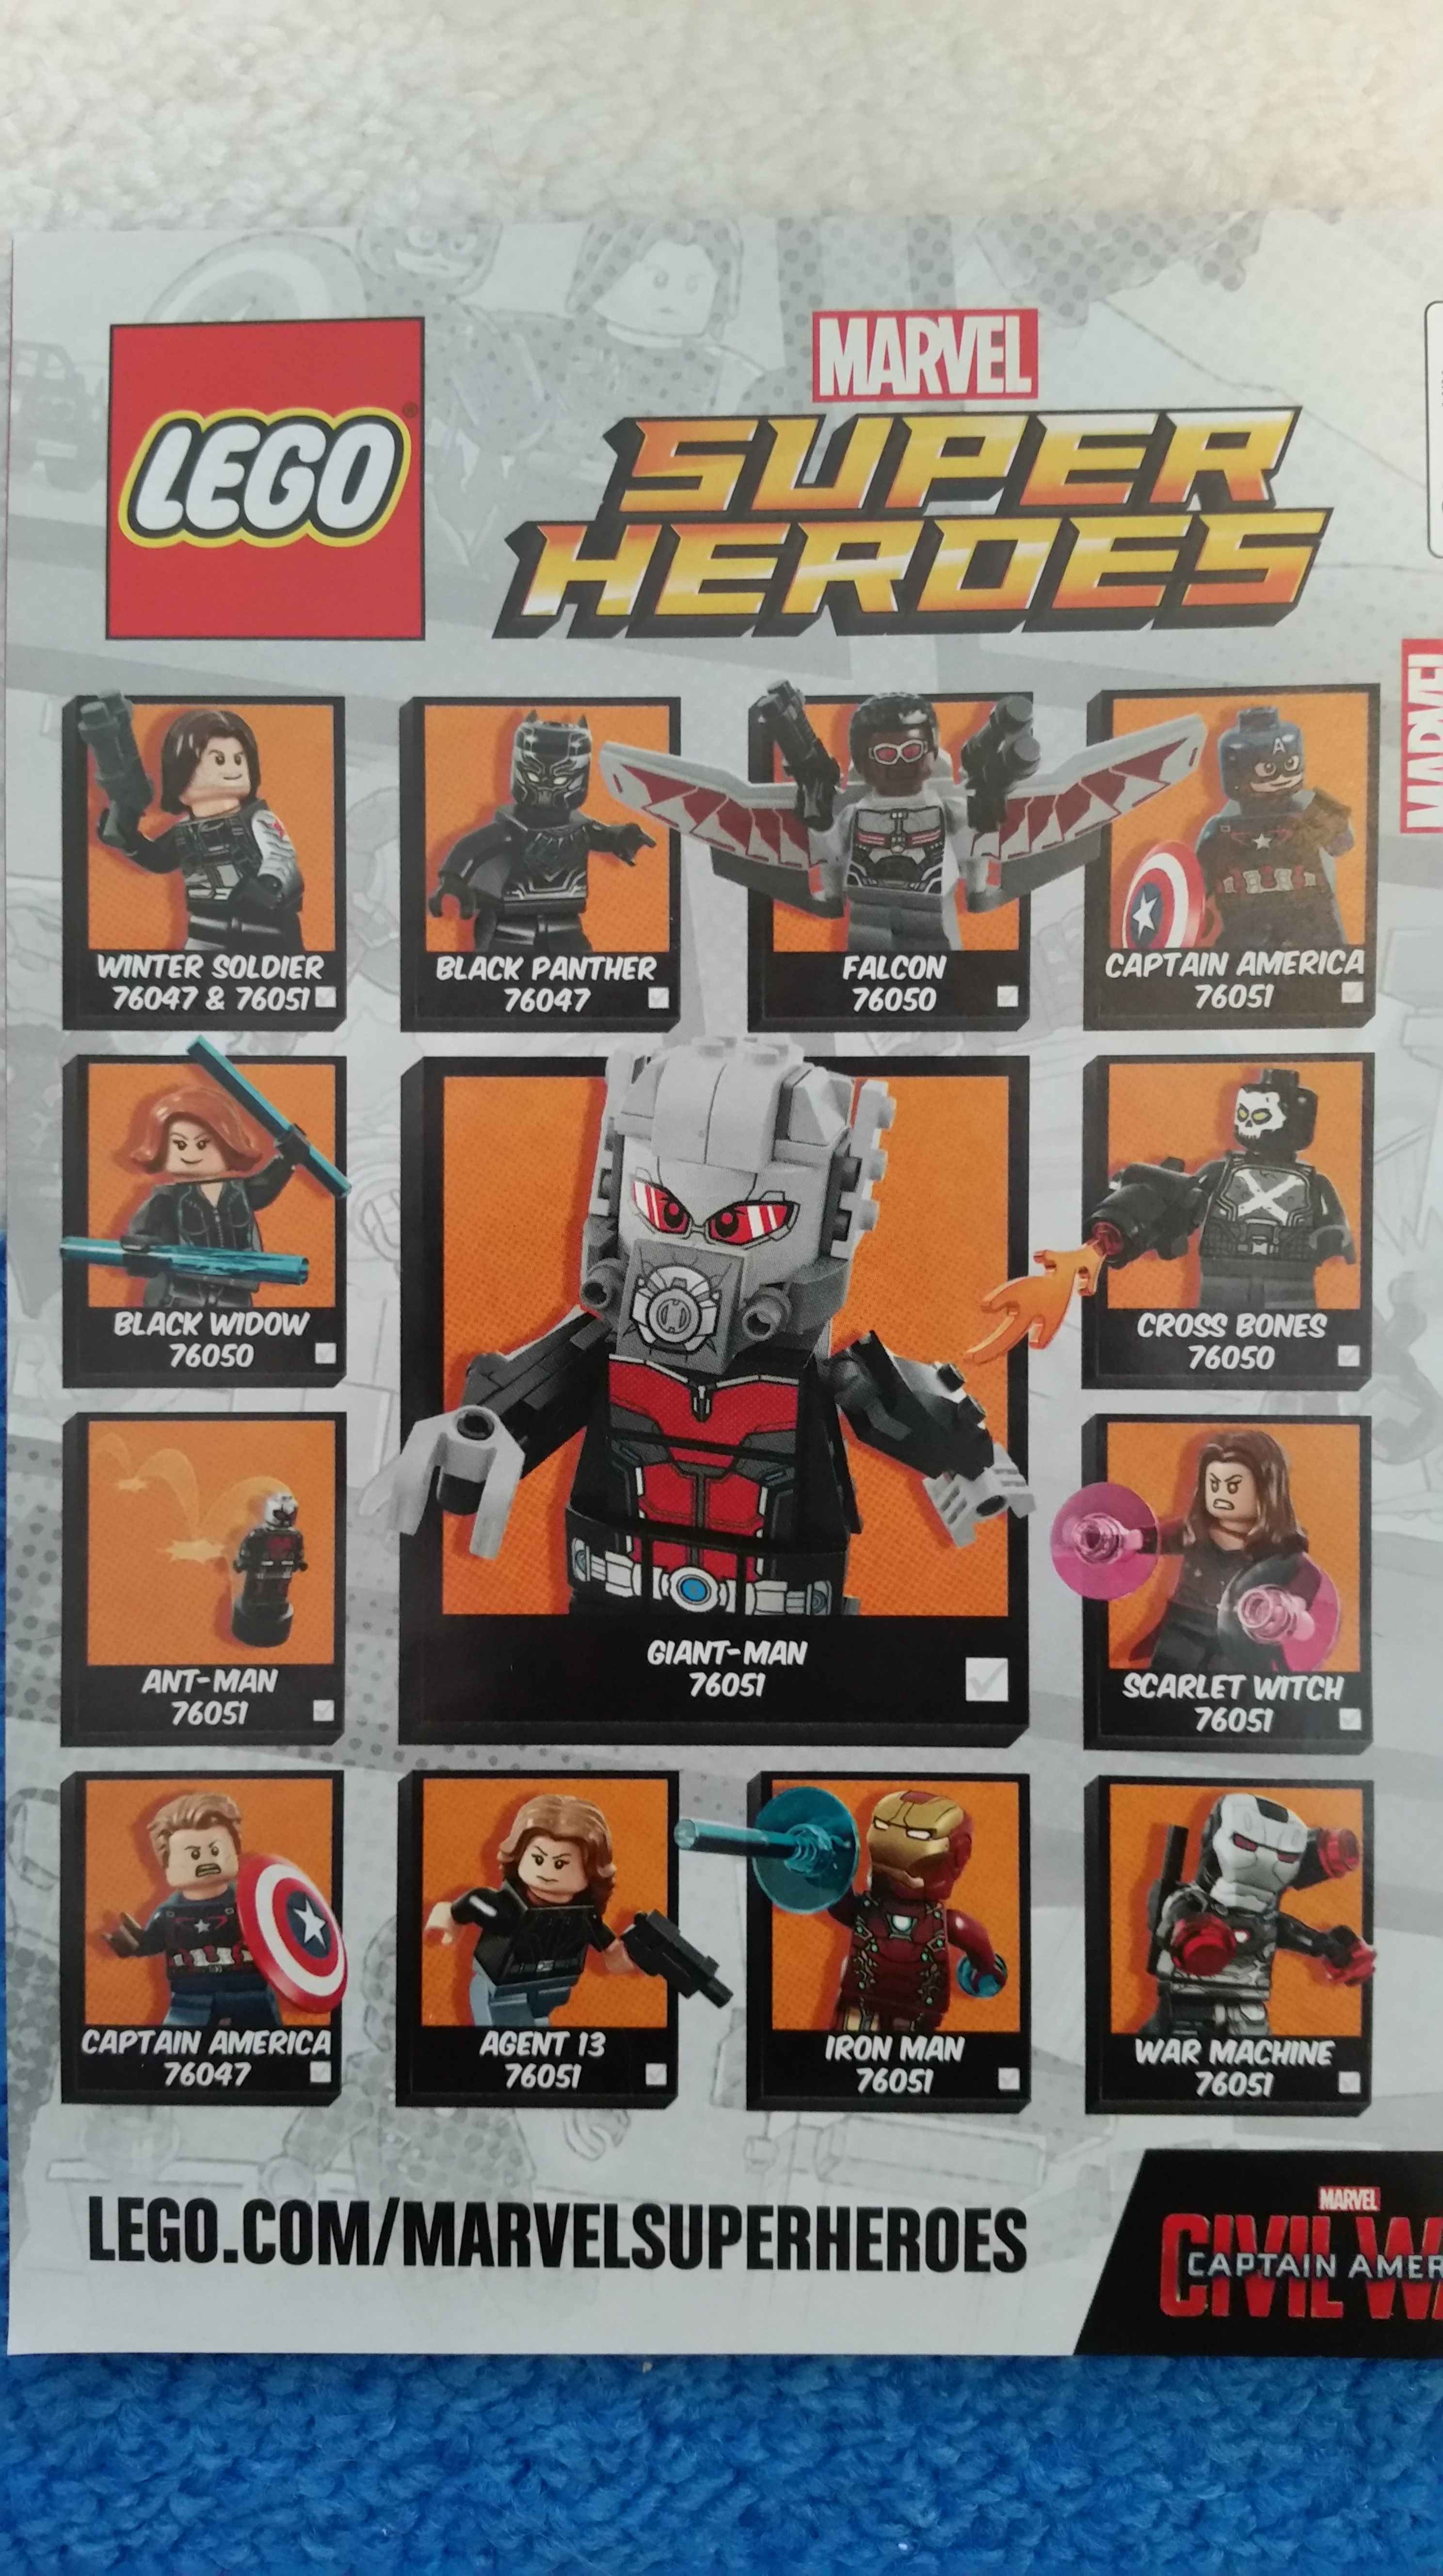 LEGO® Superheroes - Captain America with Shield - 76047 - The Brick People